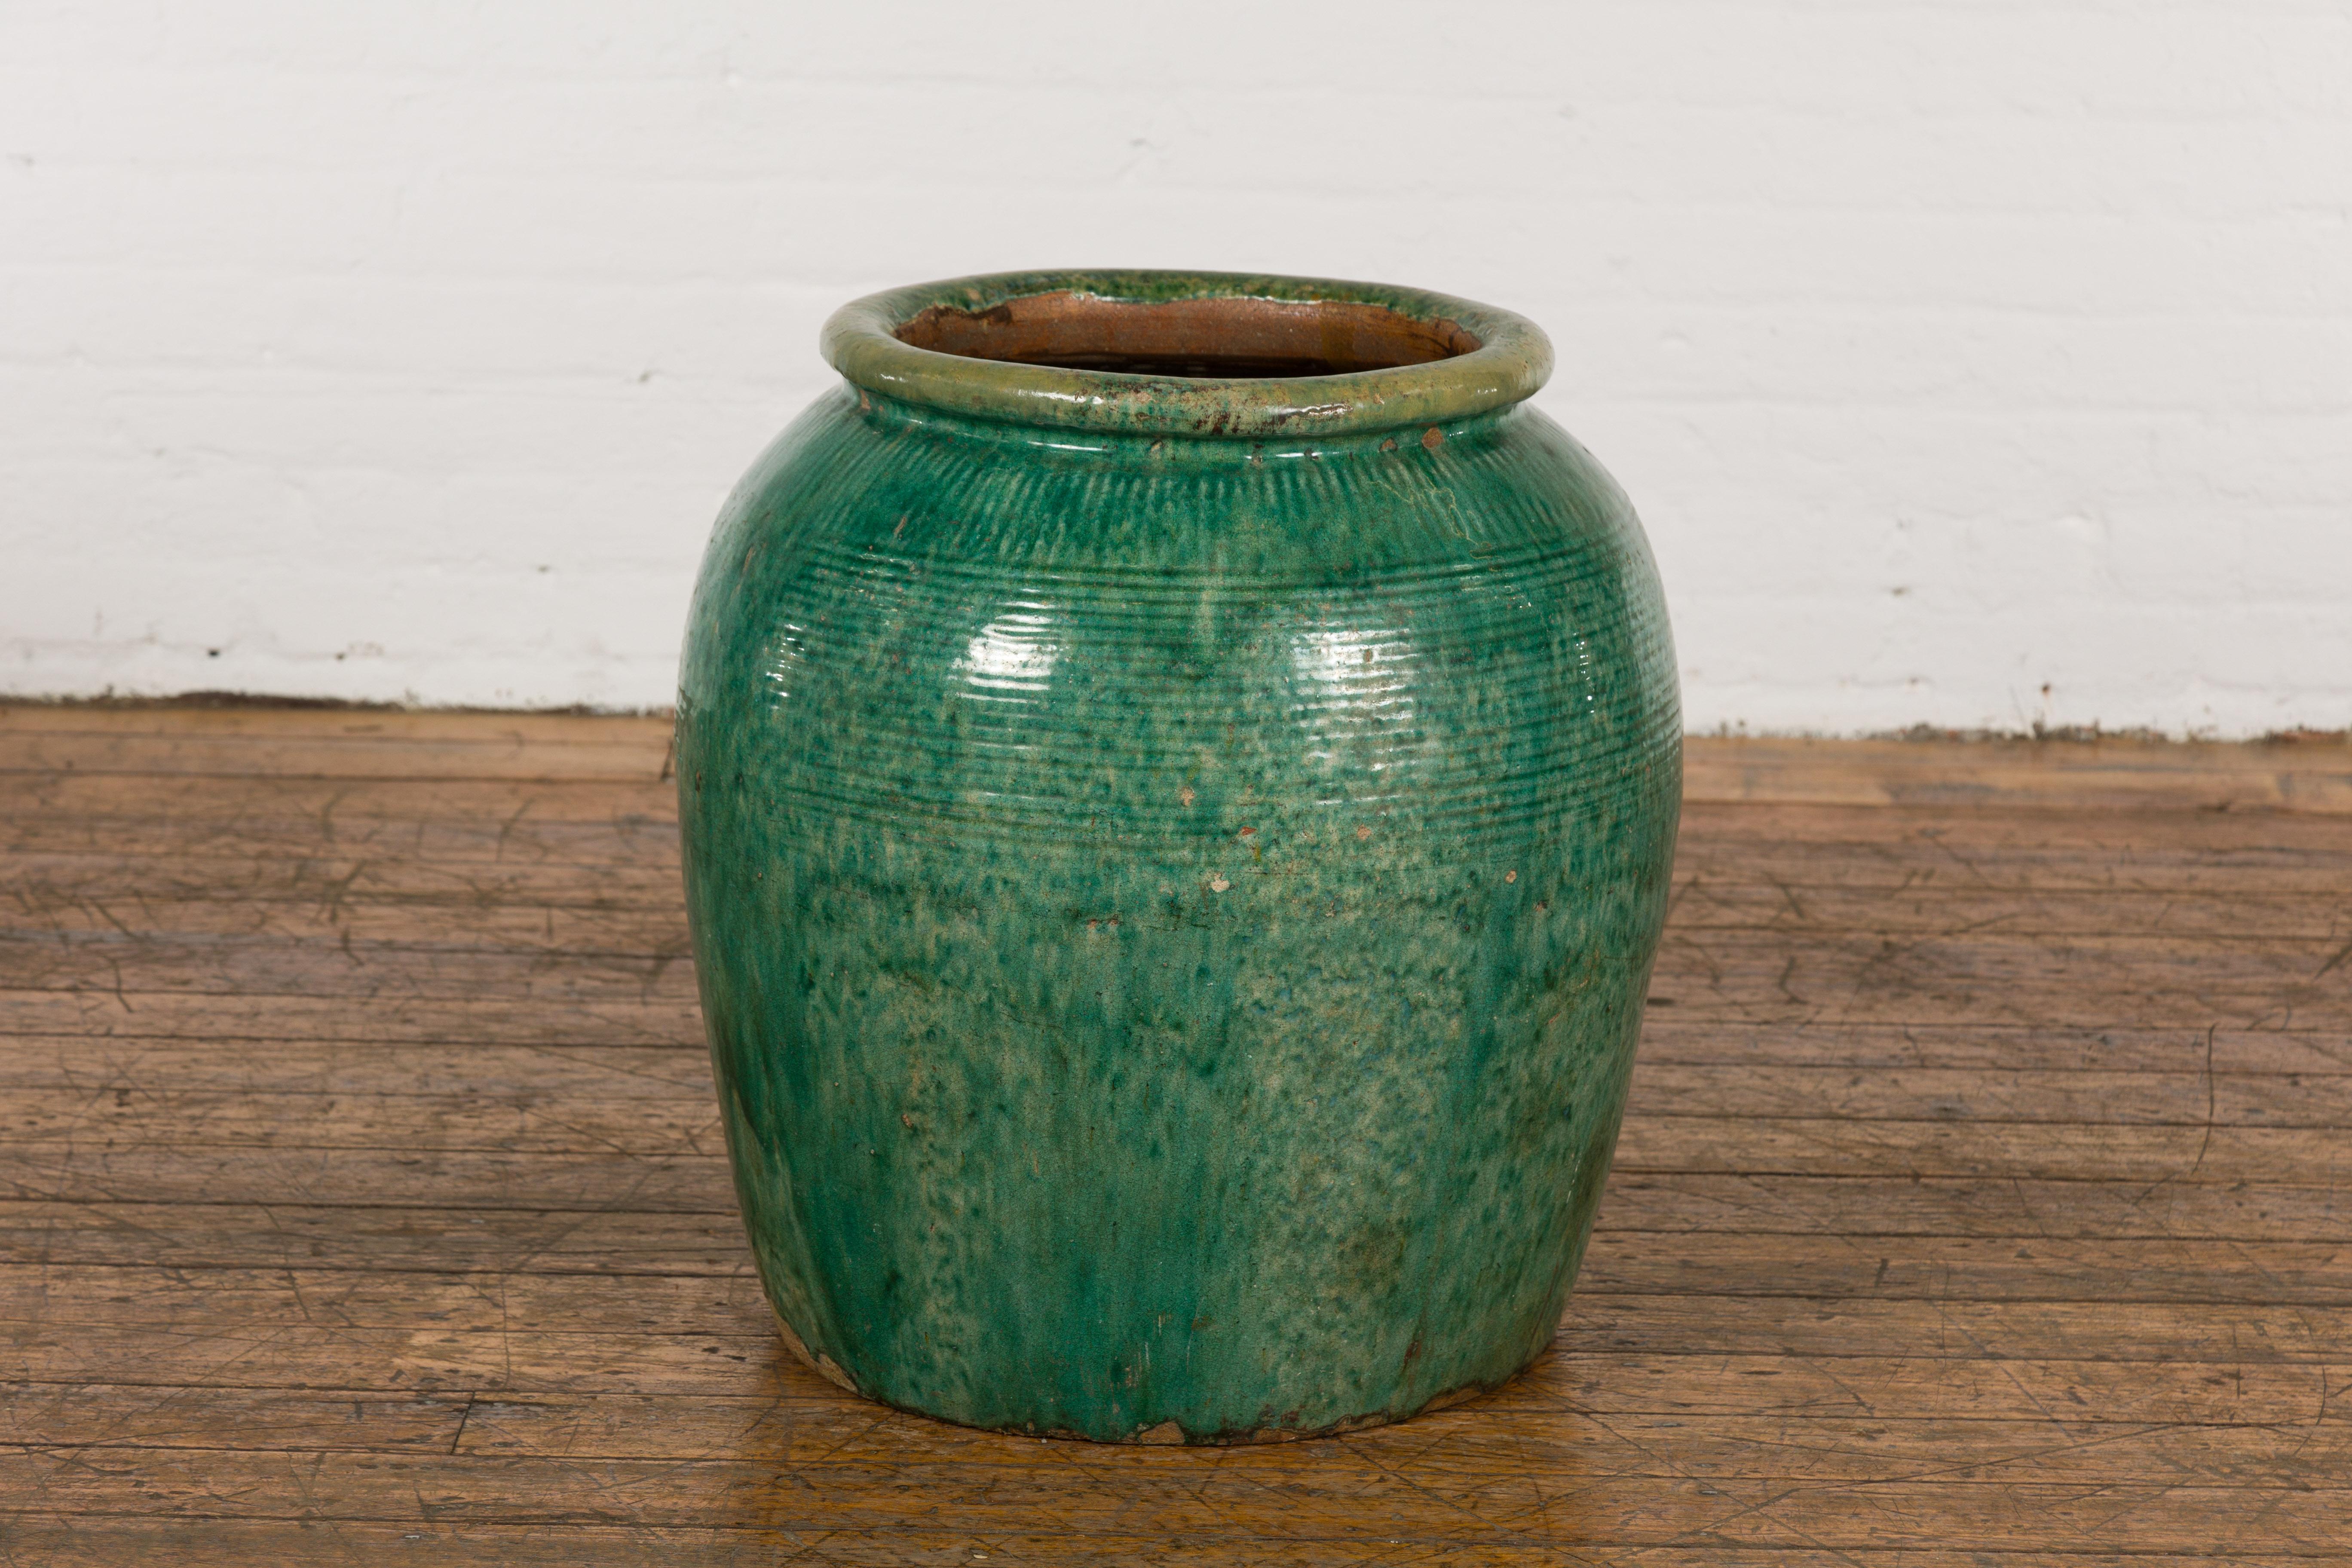 A large vintage Chinese green glazed water vessel perfect to be used as a garden planter. Hailing from the vintage era, this Chinese water vessel is a captivating blend of traditional craftsmanship and modern utility. With its vibrant green glaze,